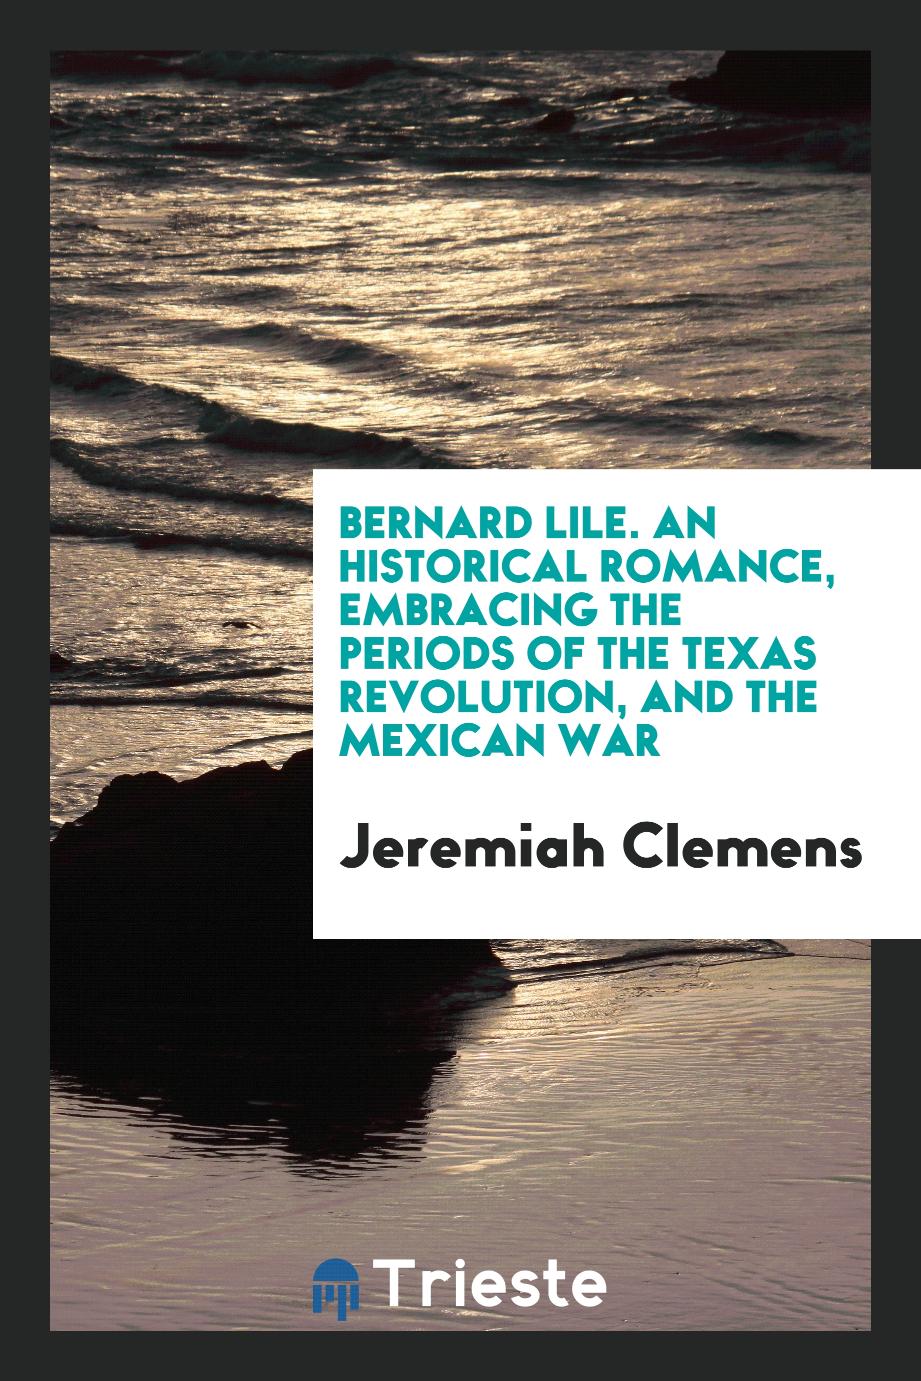 Bernard Lile. An historical romance, embracing the periods of the Texas Revolution, and the Mexican War